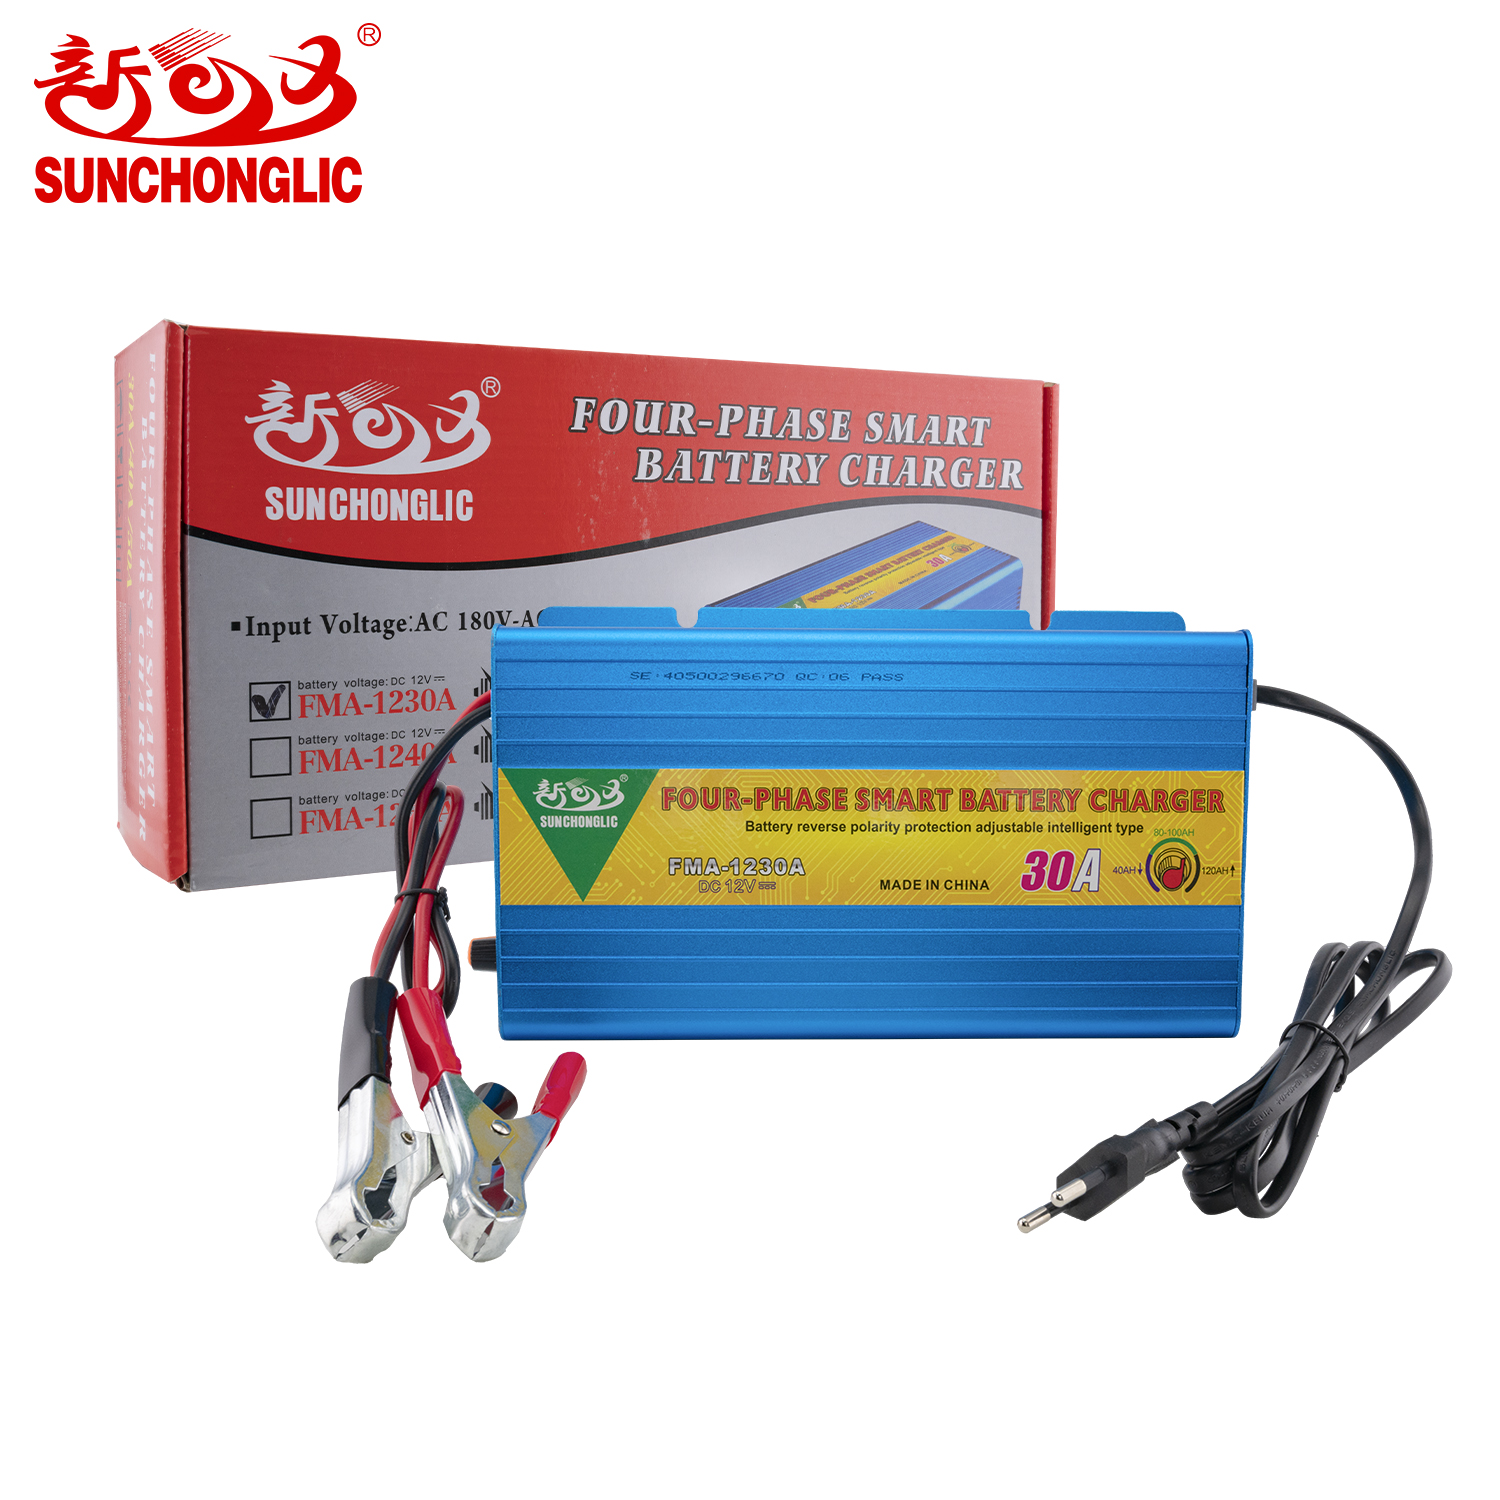 AGM/GEL Battery Charger - FMA-1230A